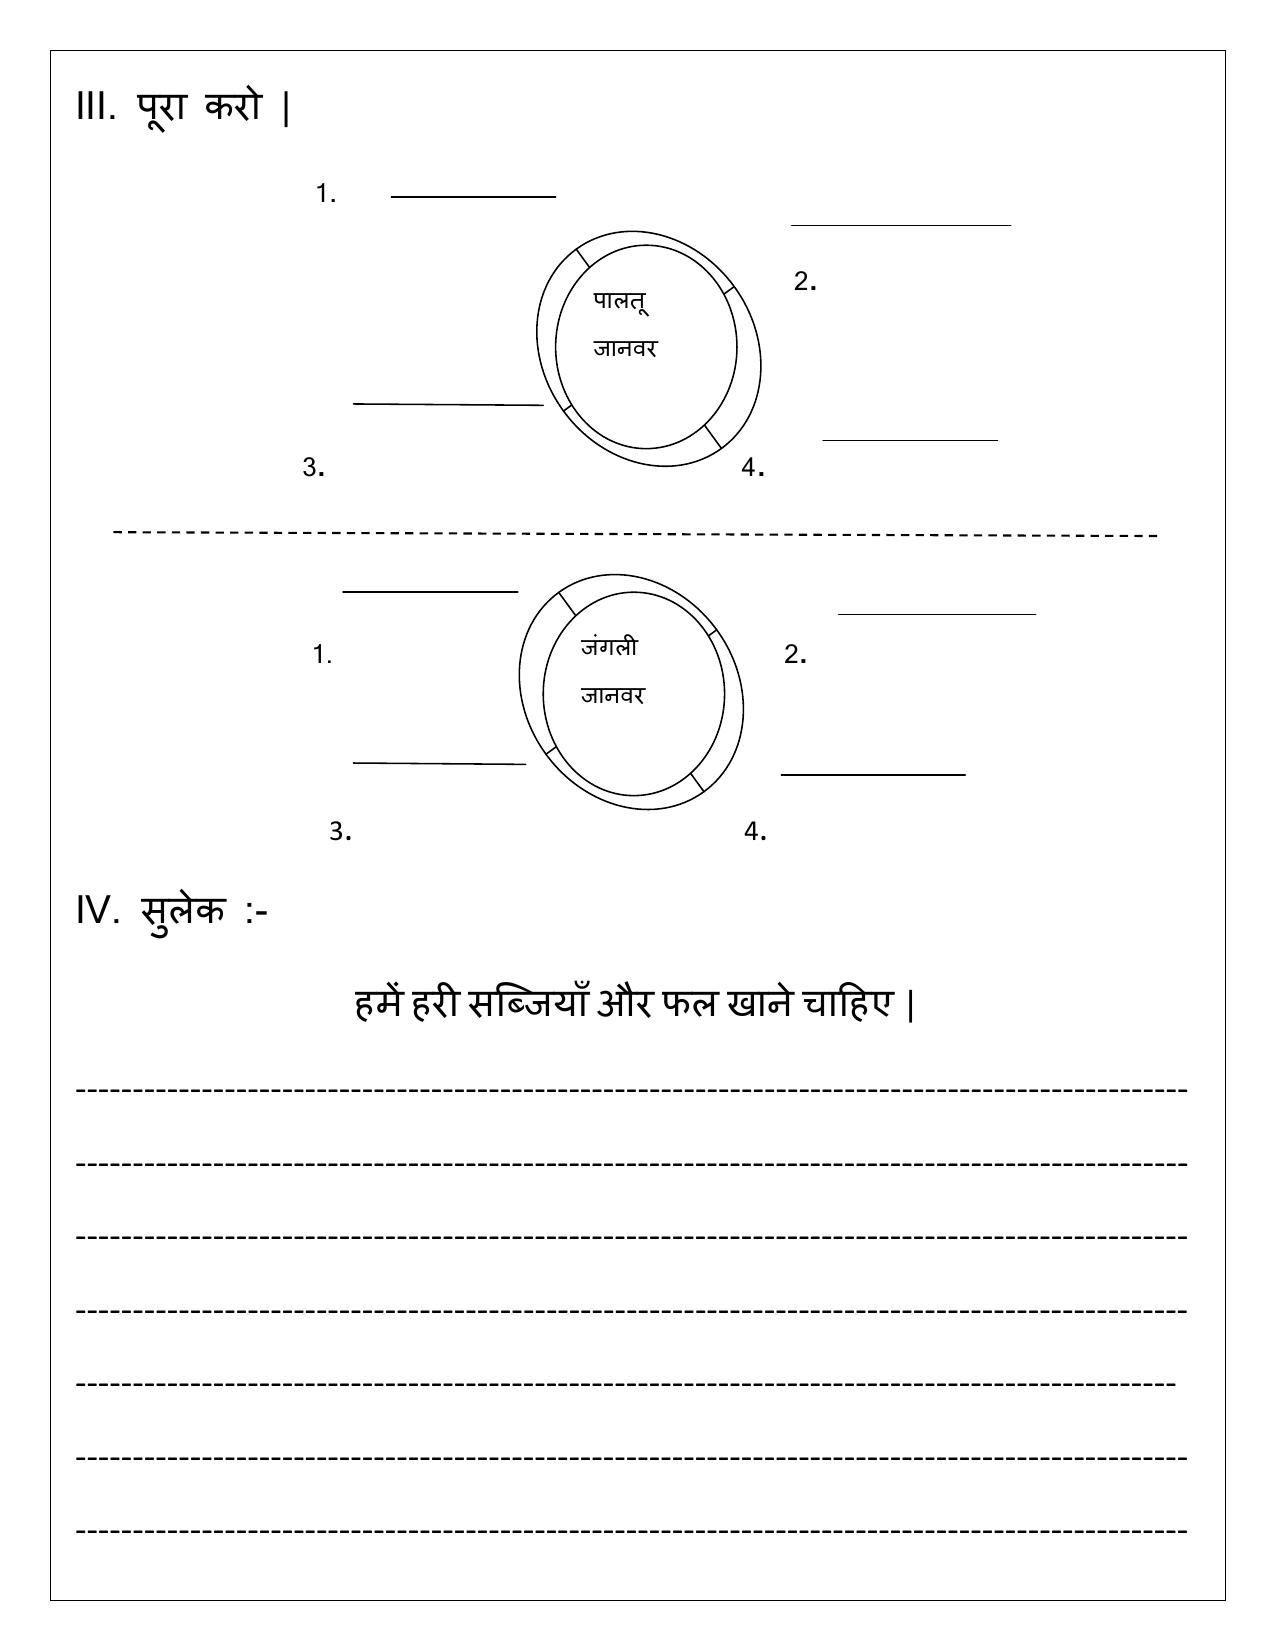 Worksheet for Class 1 Hindi Assignment 21 - Page 2